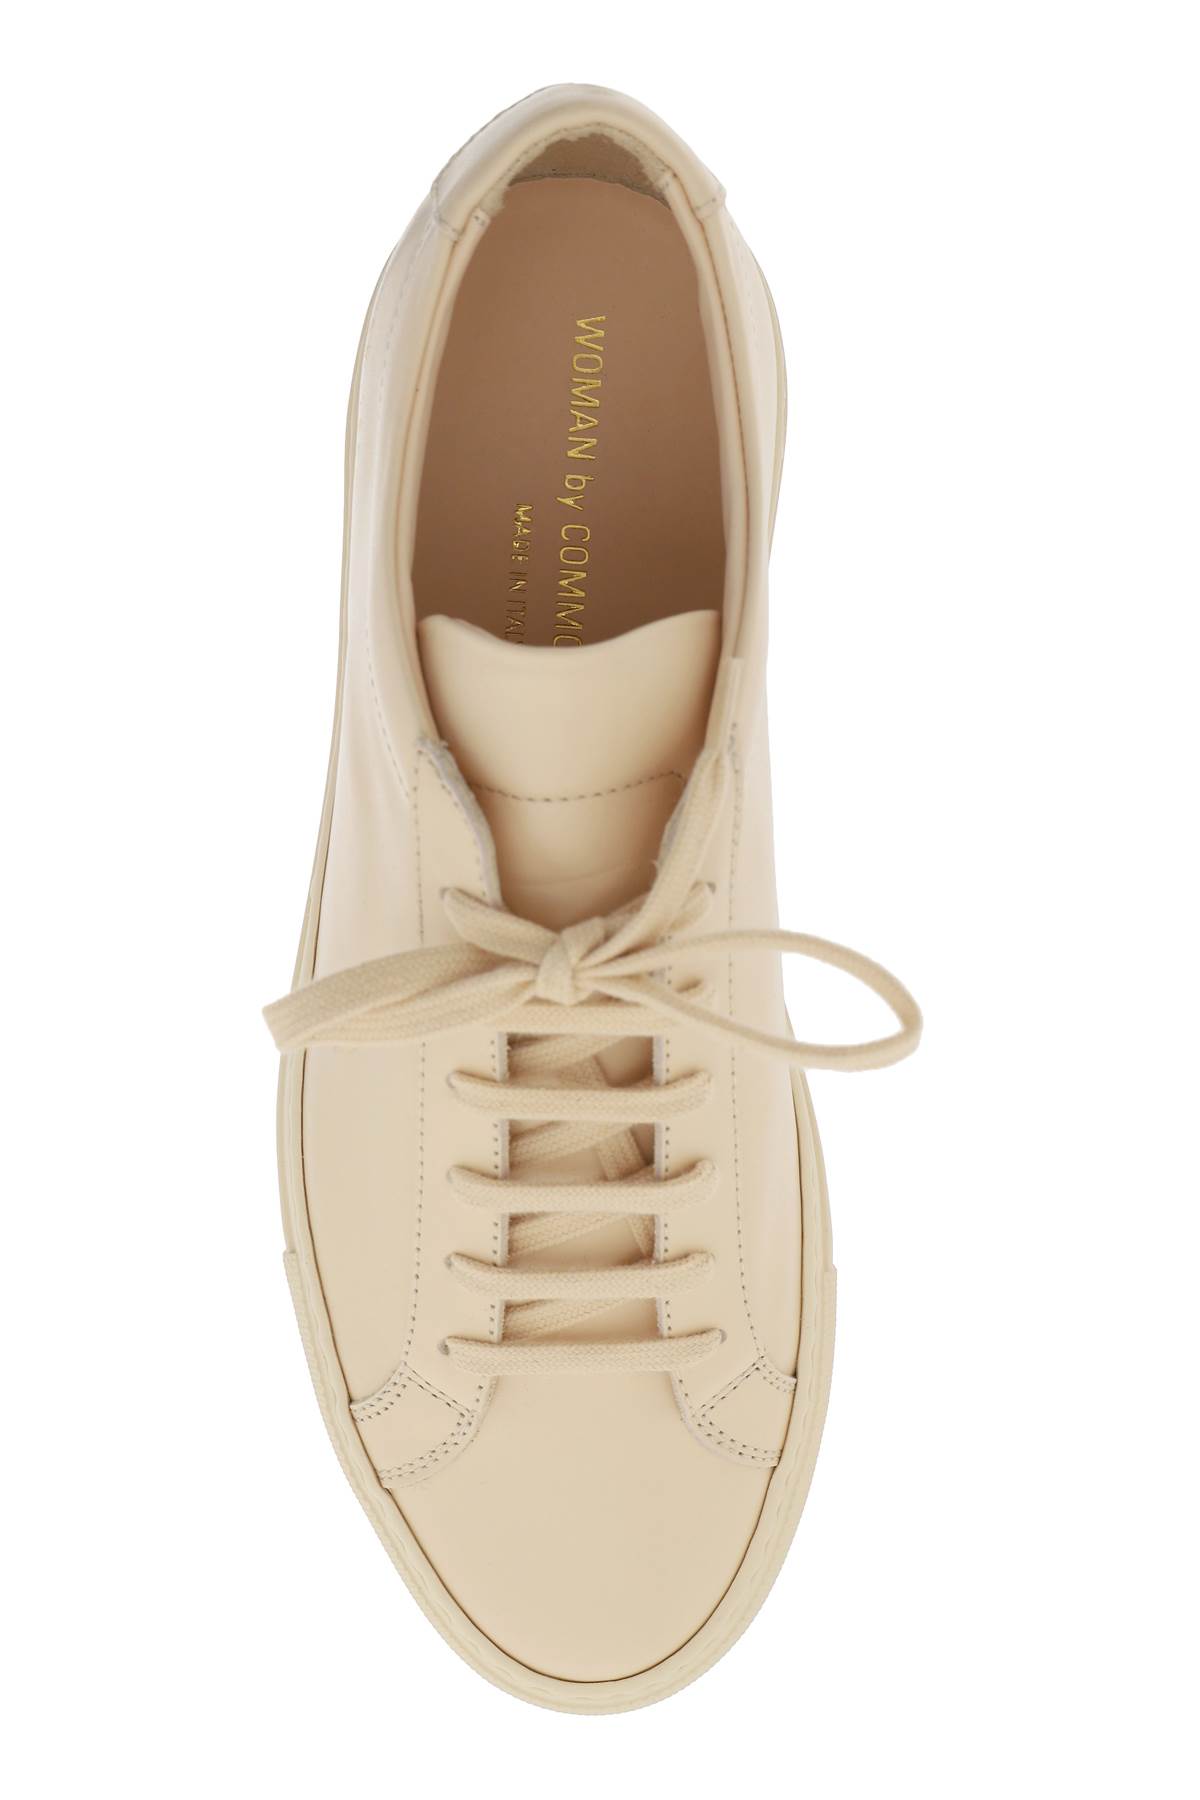 Shop Common Projects Original Achilles Leather Sneakers In Apricot (pink)